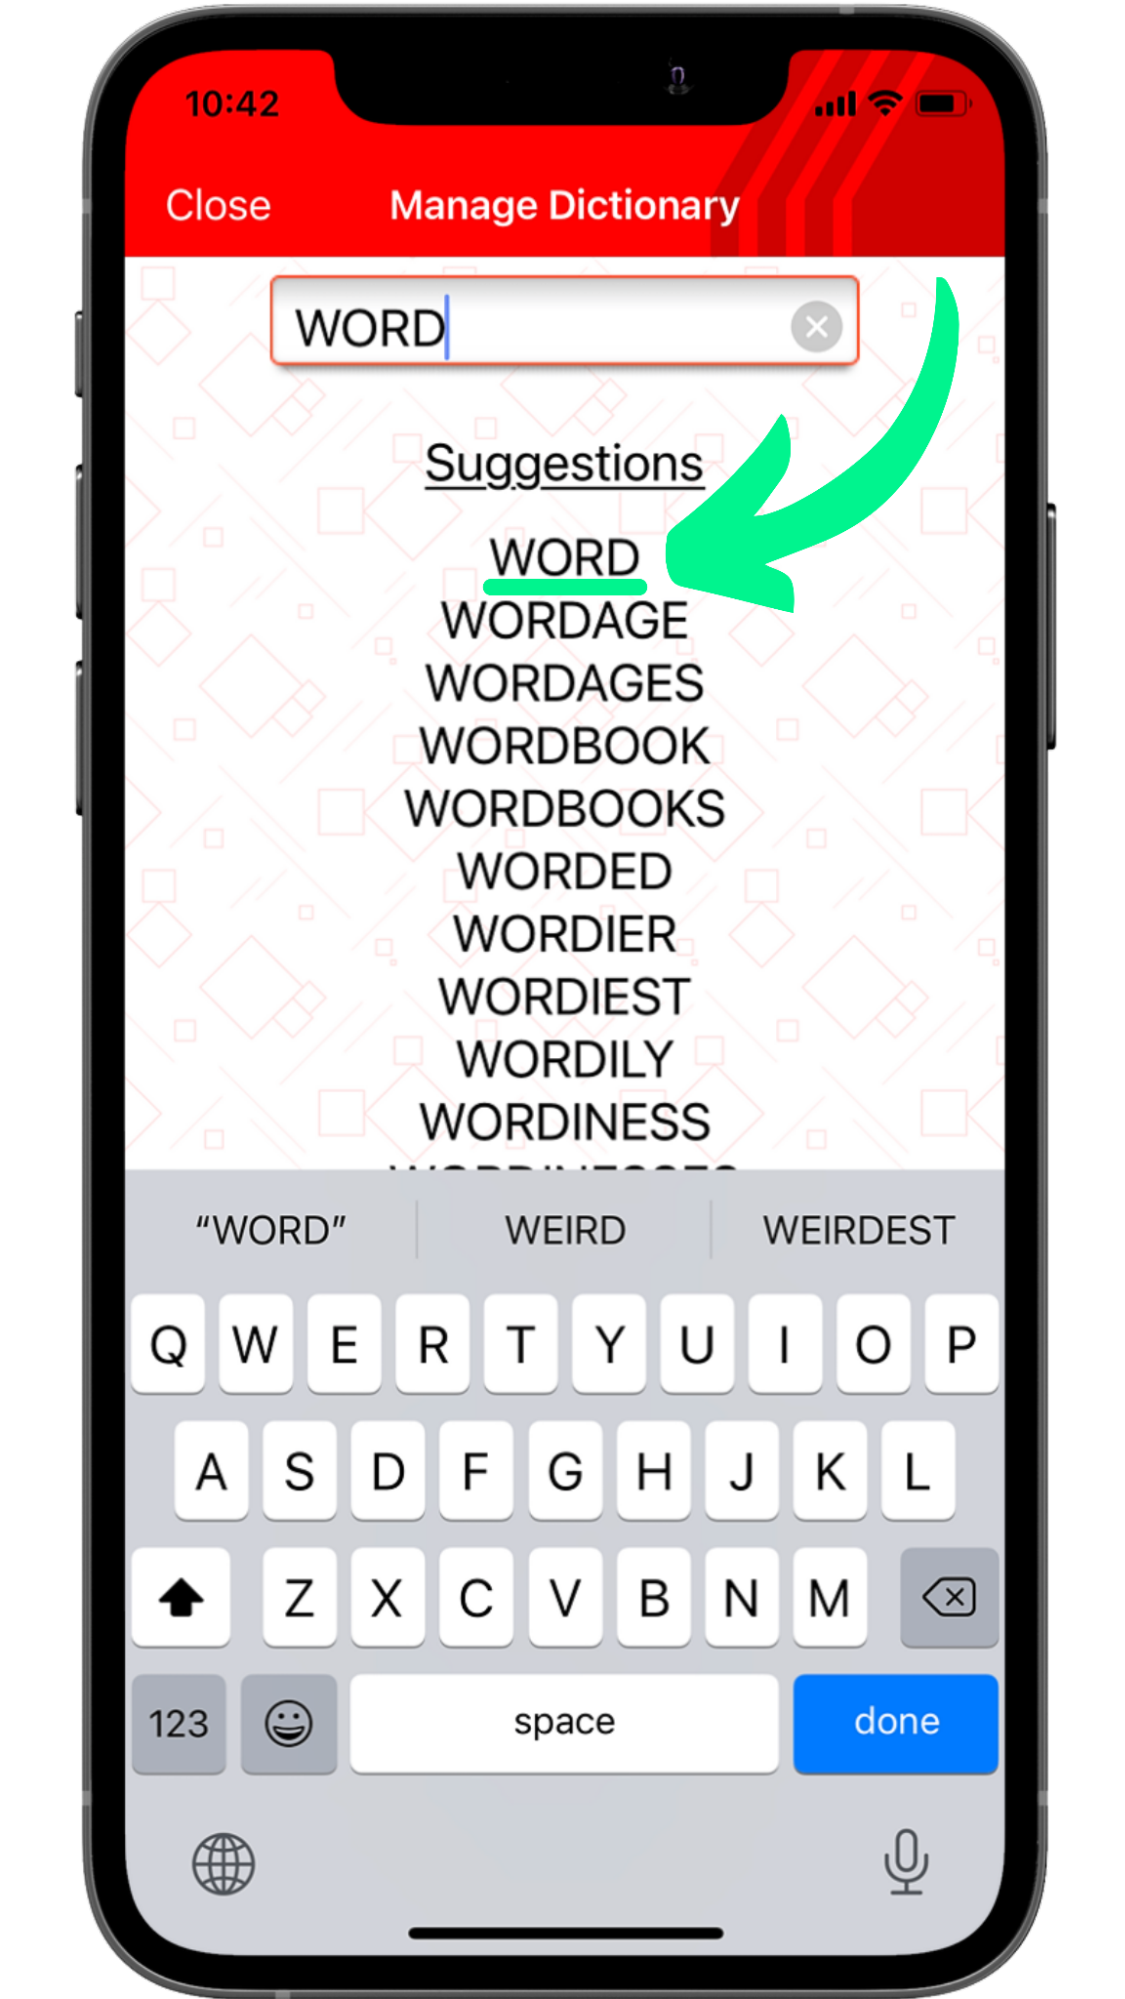 Select your word in the Suggestions list